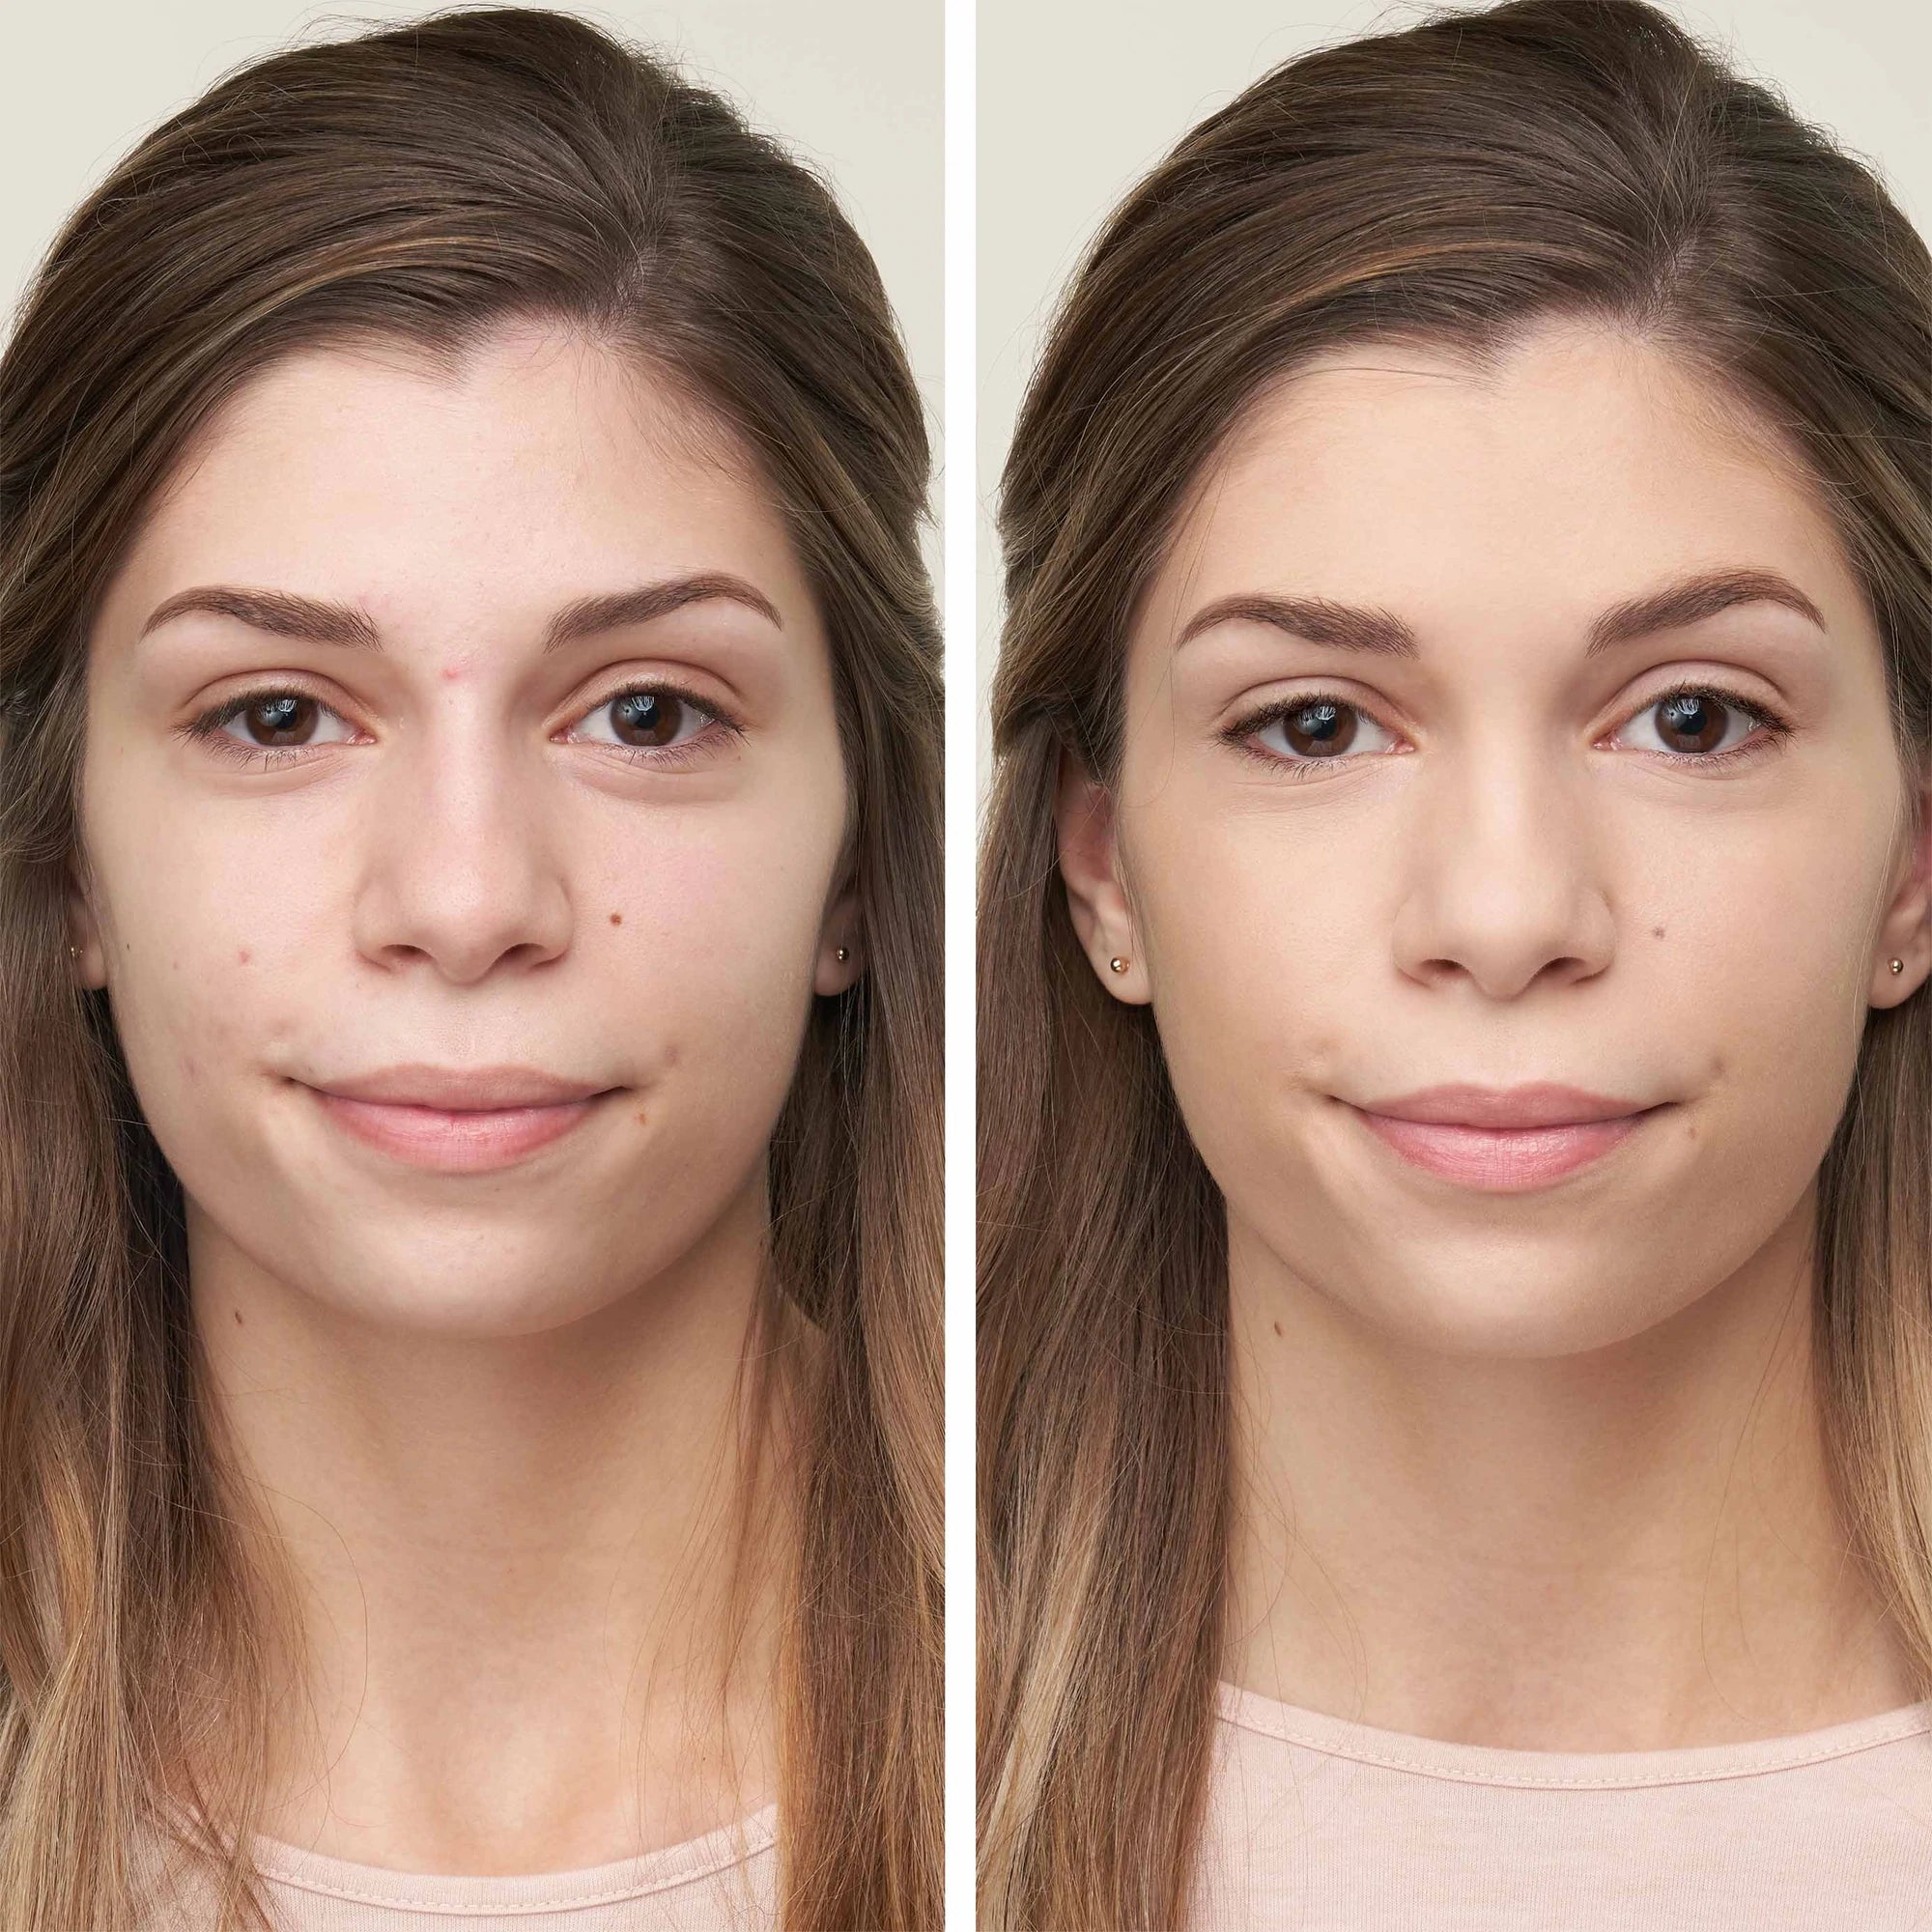 How To Camouflage Acne With Makeup